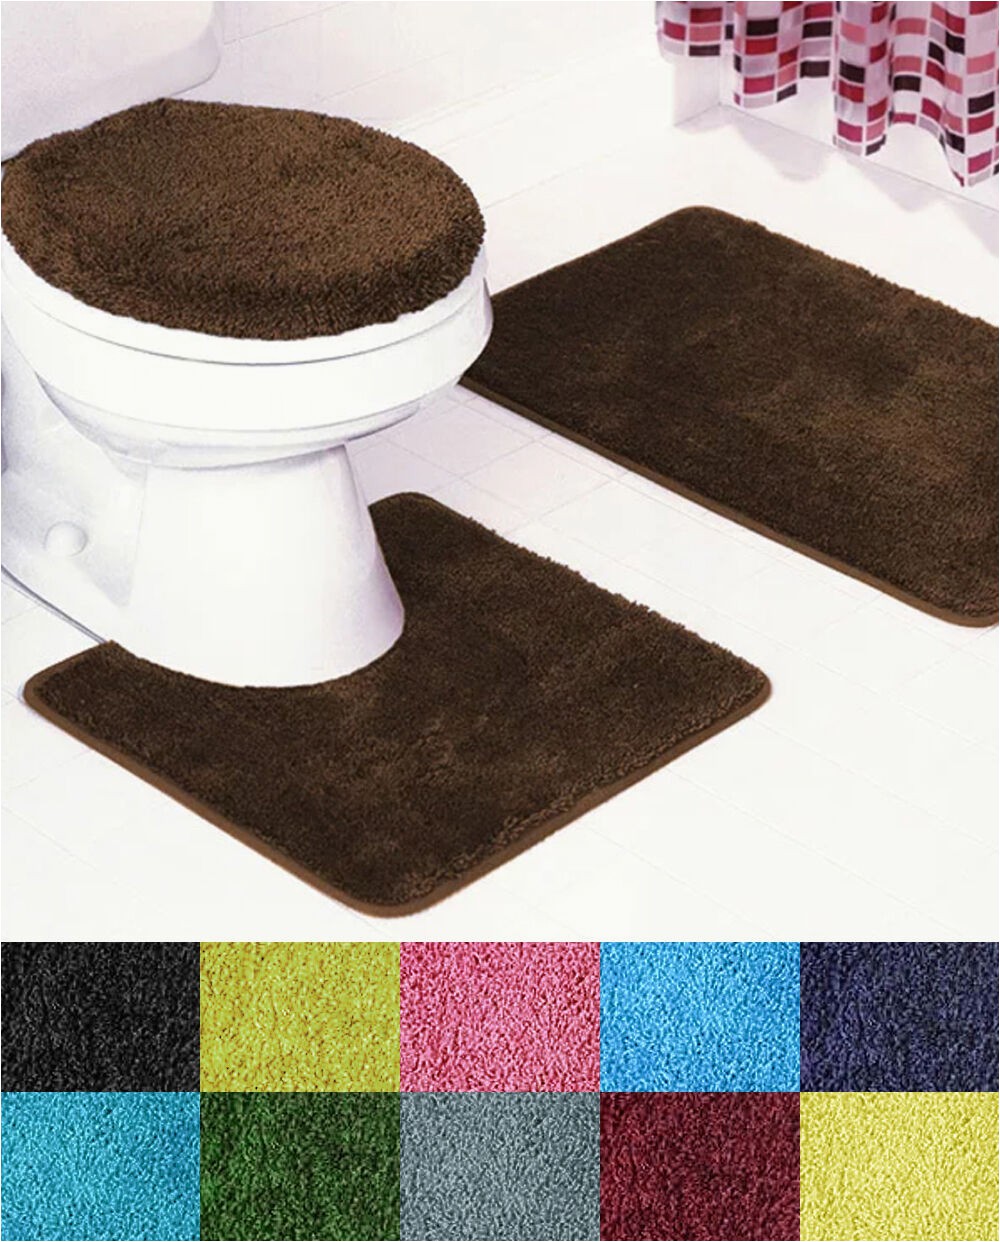 Bathroom Rugs and toilet Covers Florence 3 Piece Bathroom Rug and toilet Seat Cover Set